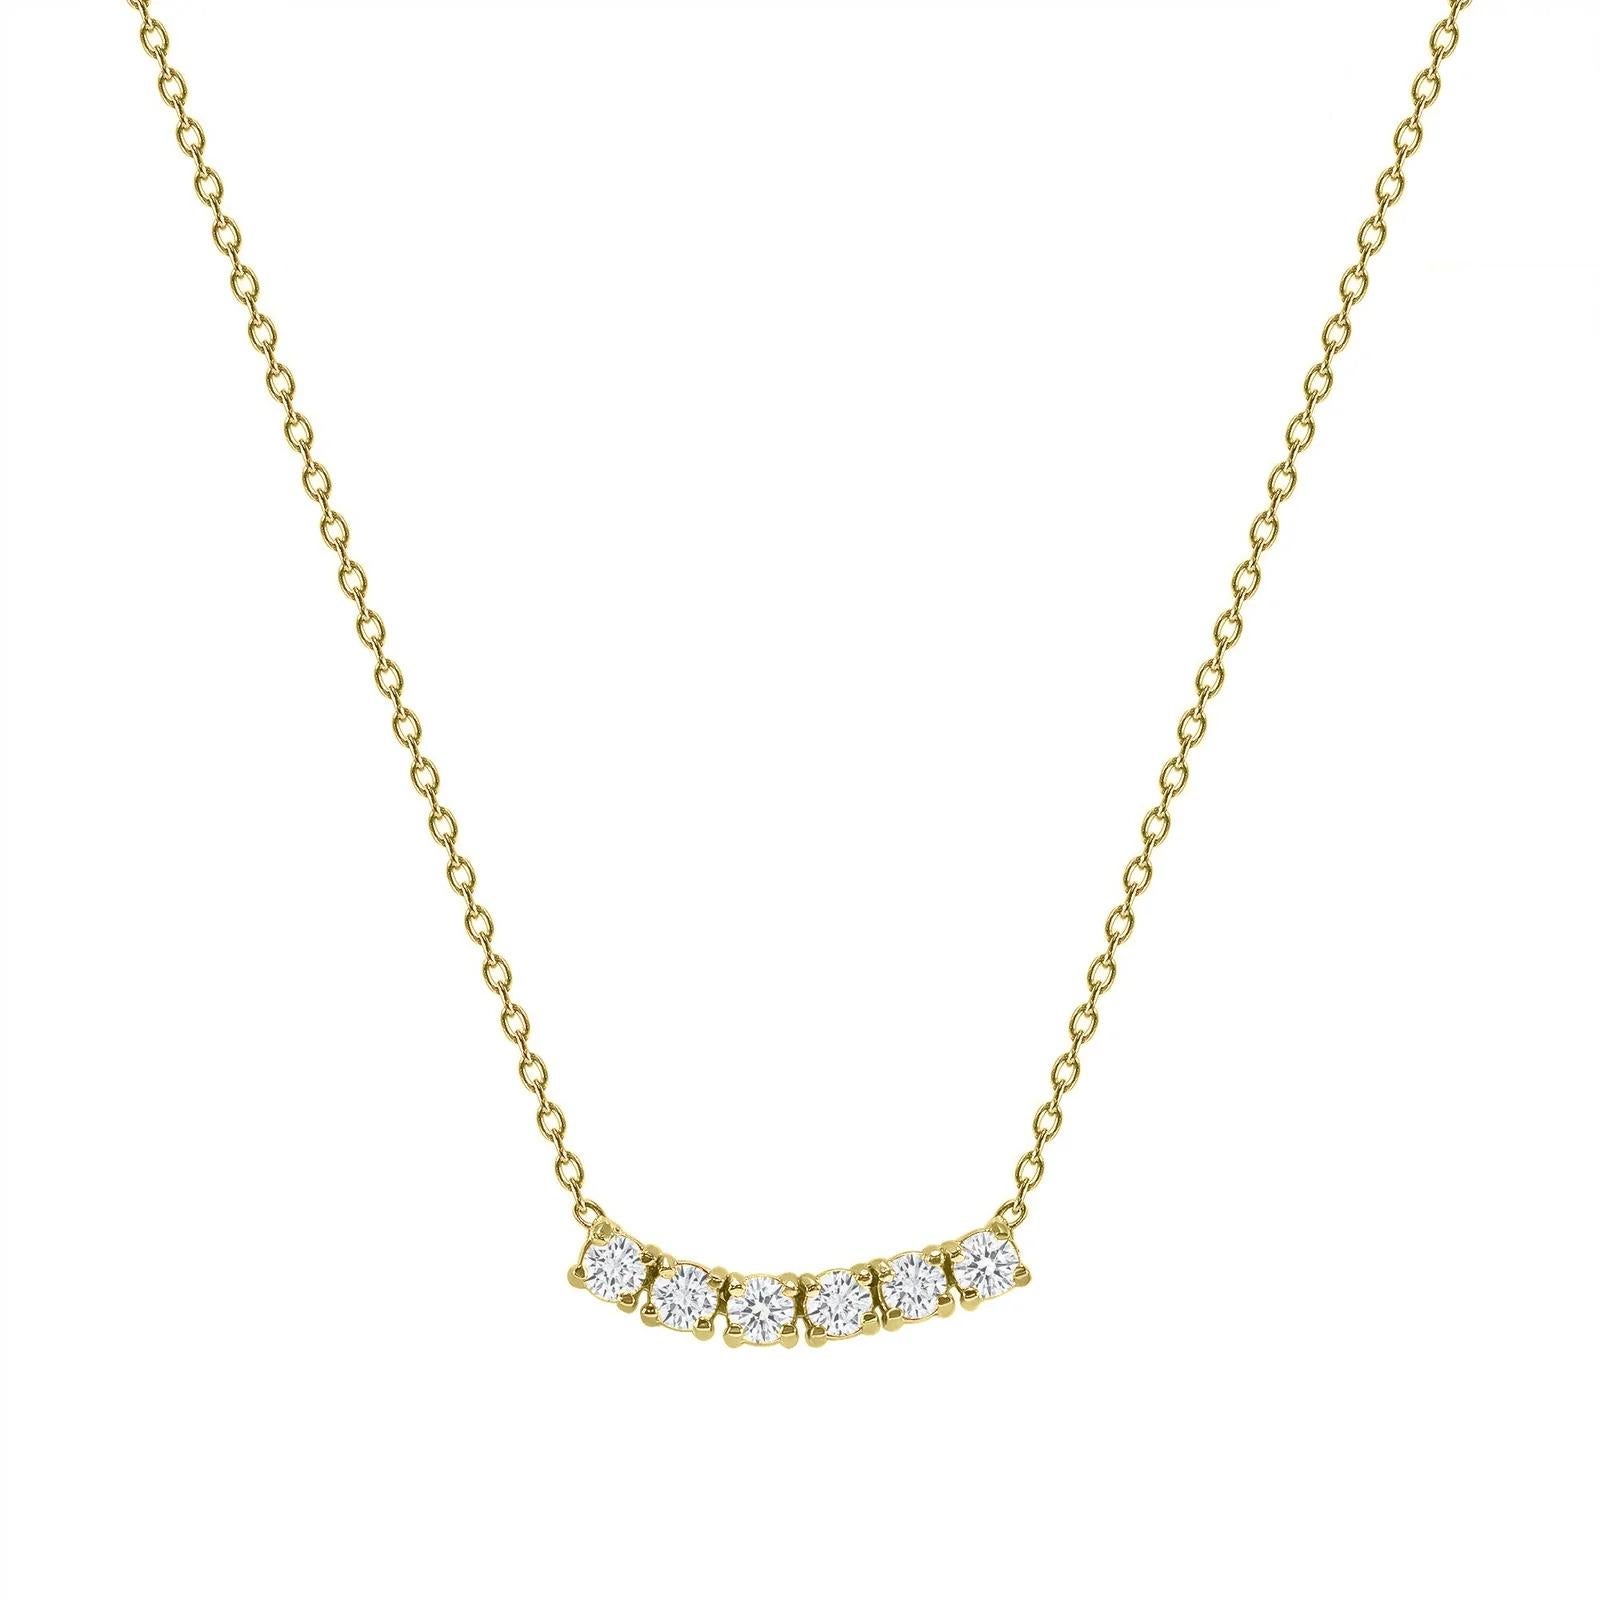 This petite, curved diamond necklace is crafted with gorgeous 14k gold set with six round diamonds.  

Gold: 14k 
Diamond Total Carats: 0.75 ct
Diamond Cut: Round (6 diamonds)
Diamond Clarity: VS
Diamond Color: F
Color: Yellow Gold
Necklace Length: